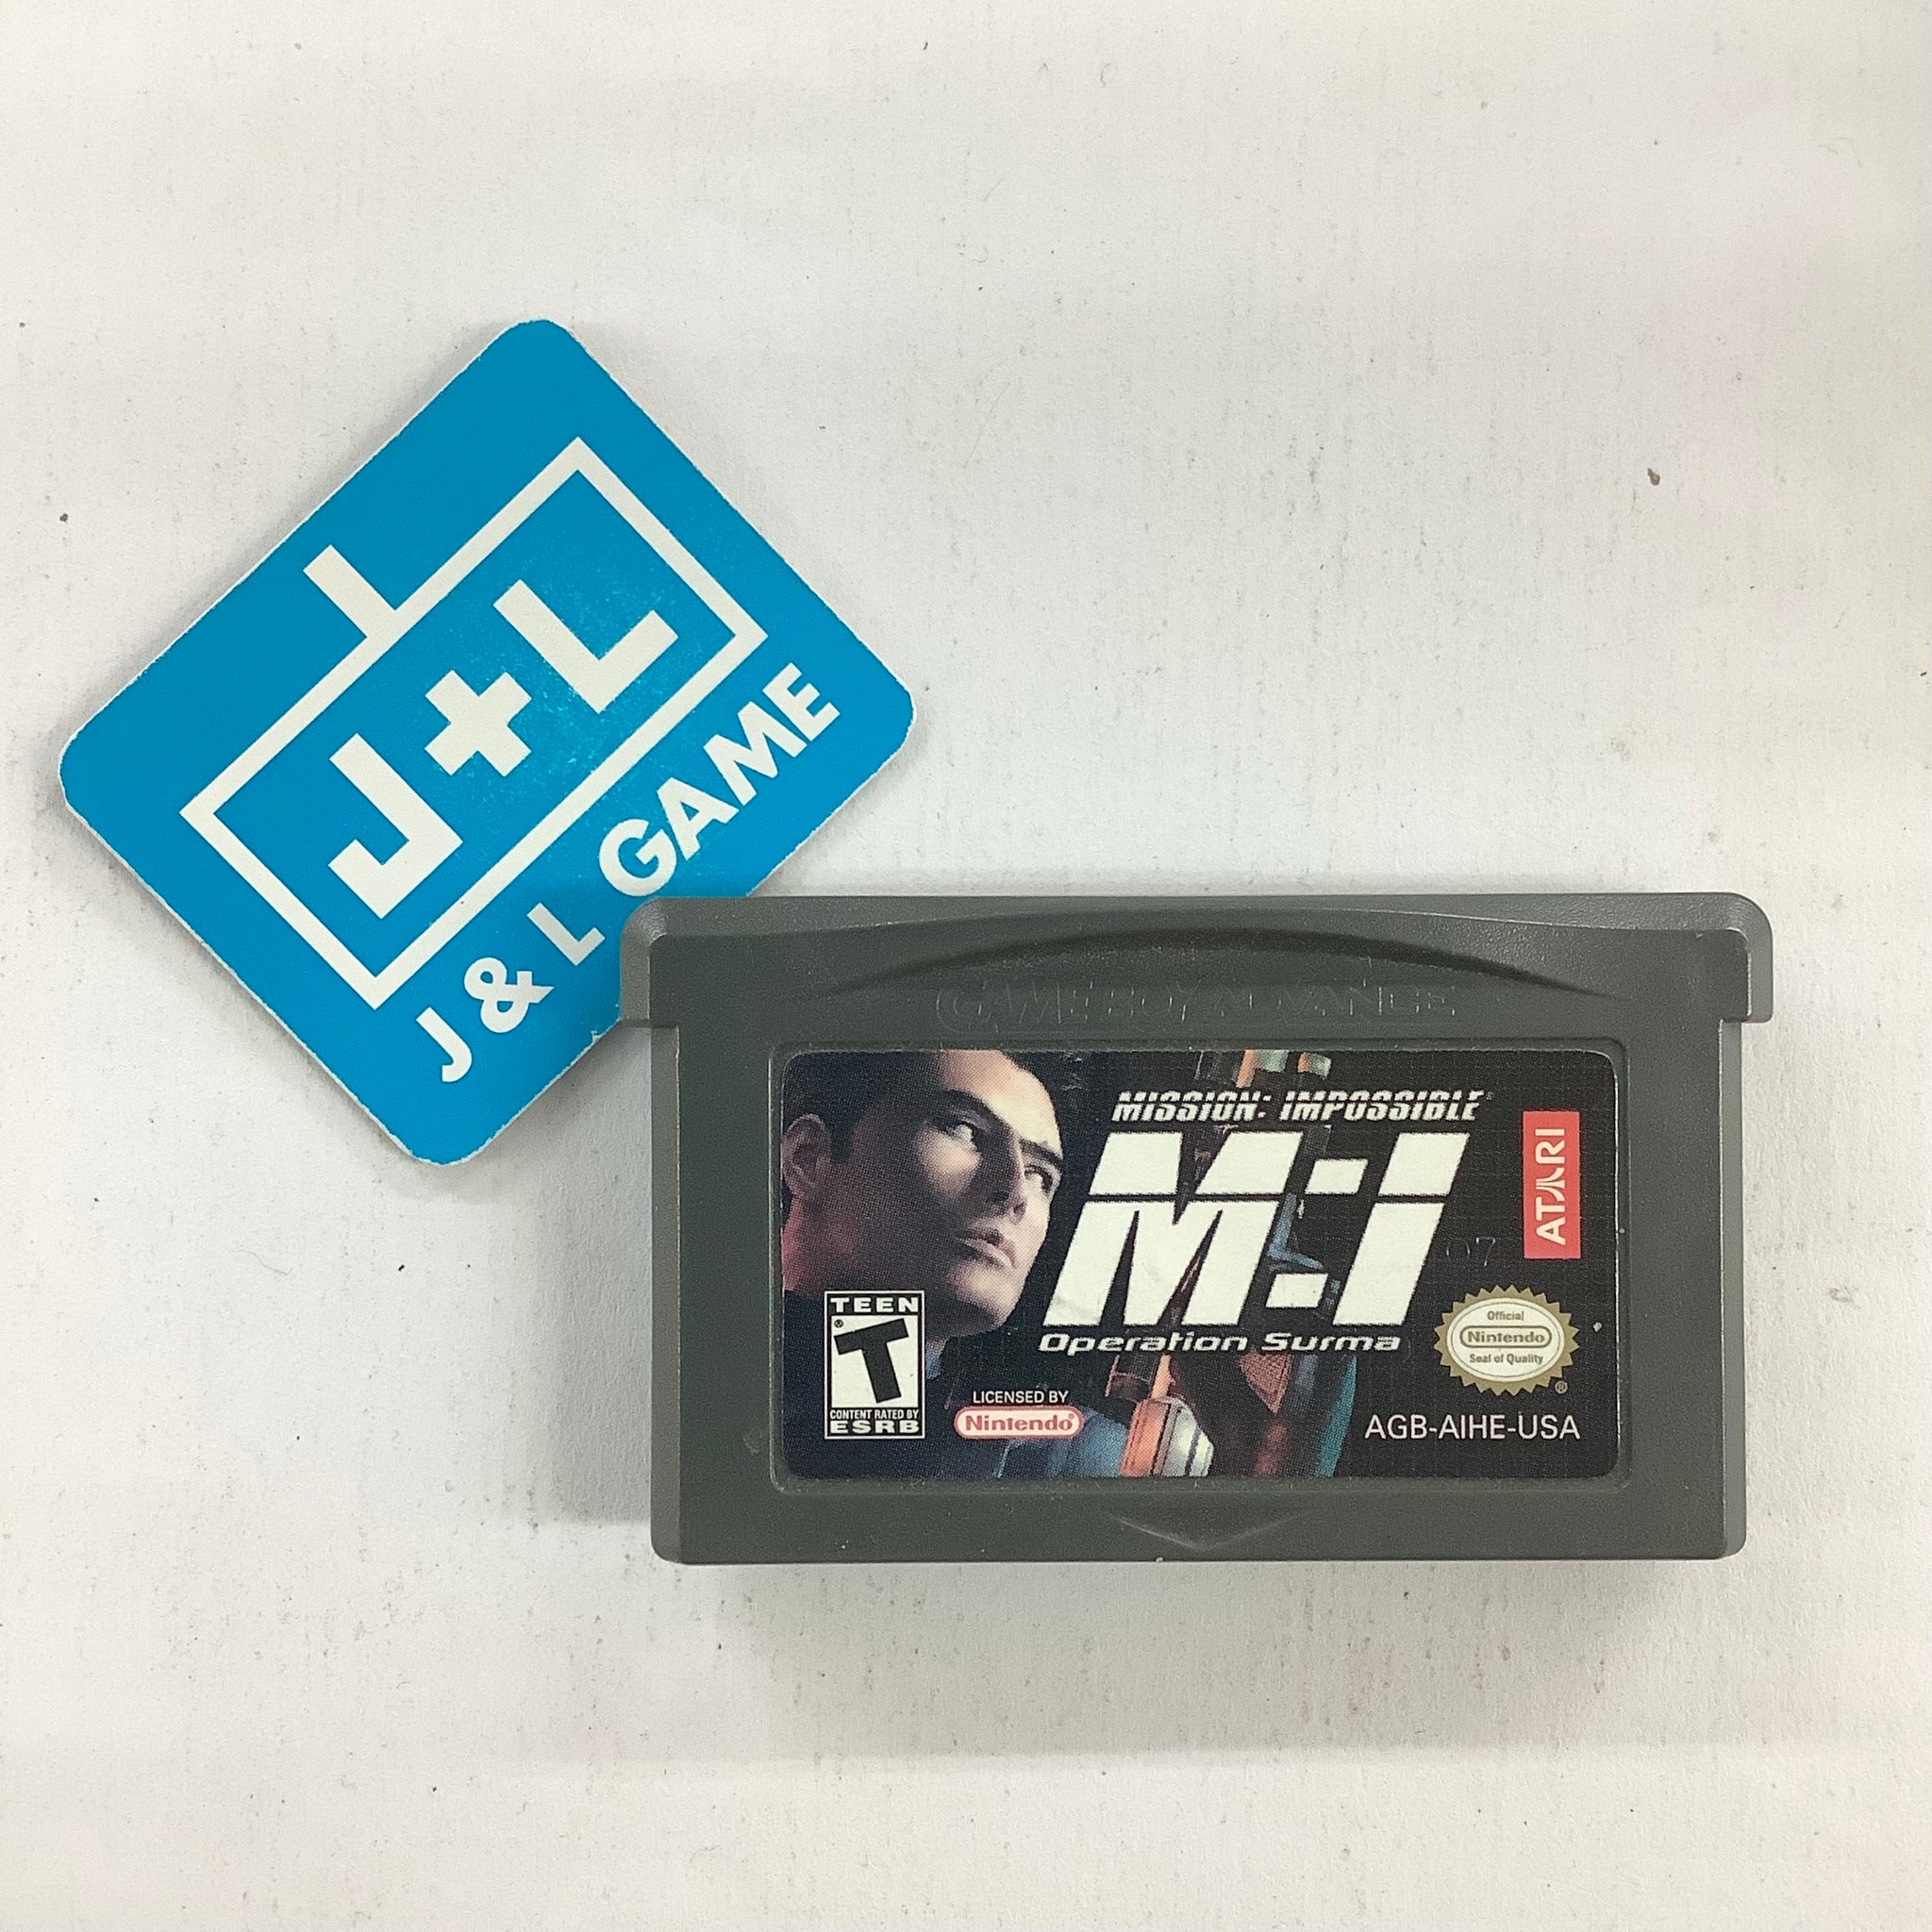 Mission: Impossible: Operation Surma - (GBA) Game Boy Advance [Pre-Owned] Video Games Atari SA   